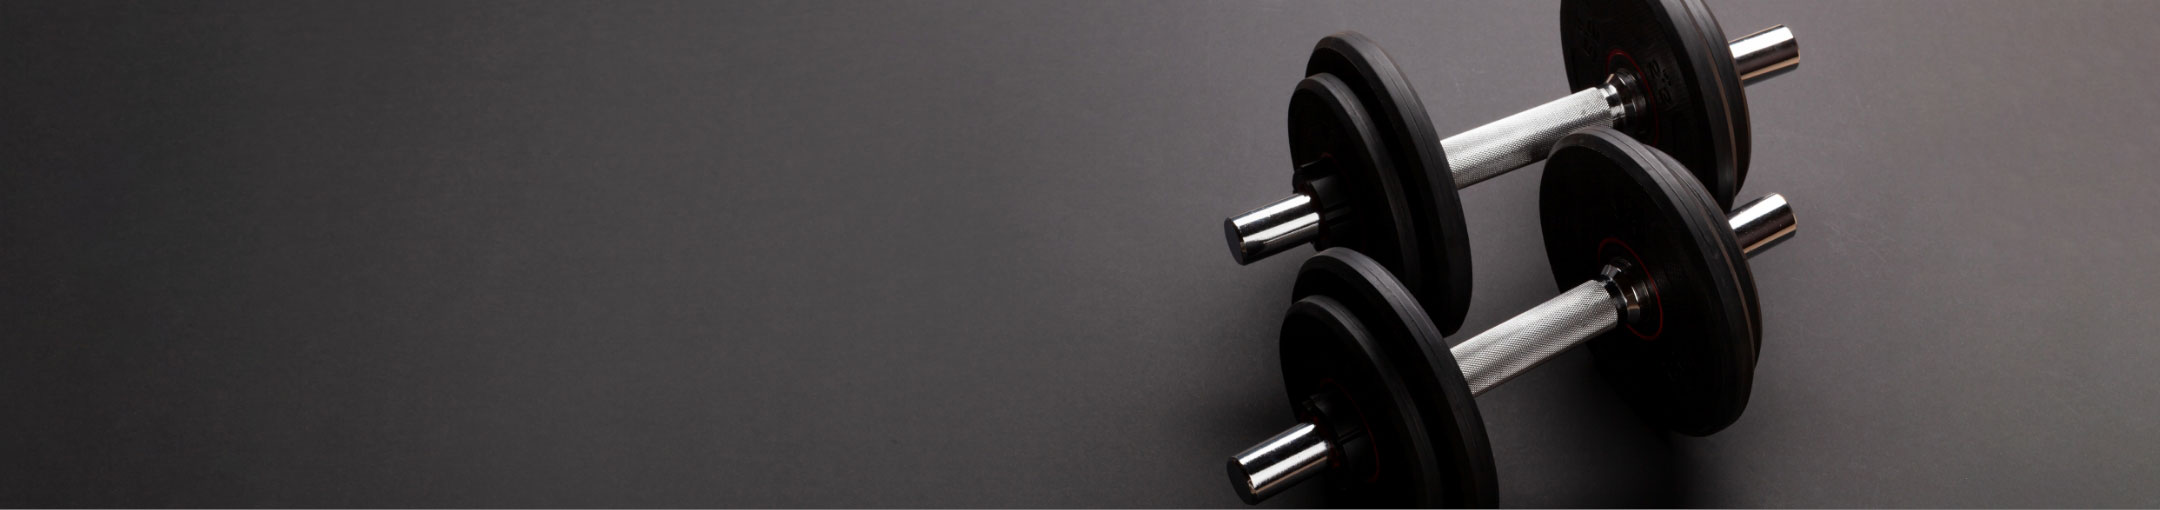 dumbbell weights on a mat